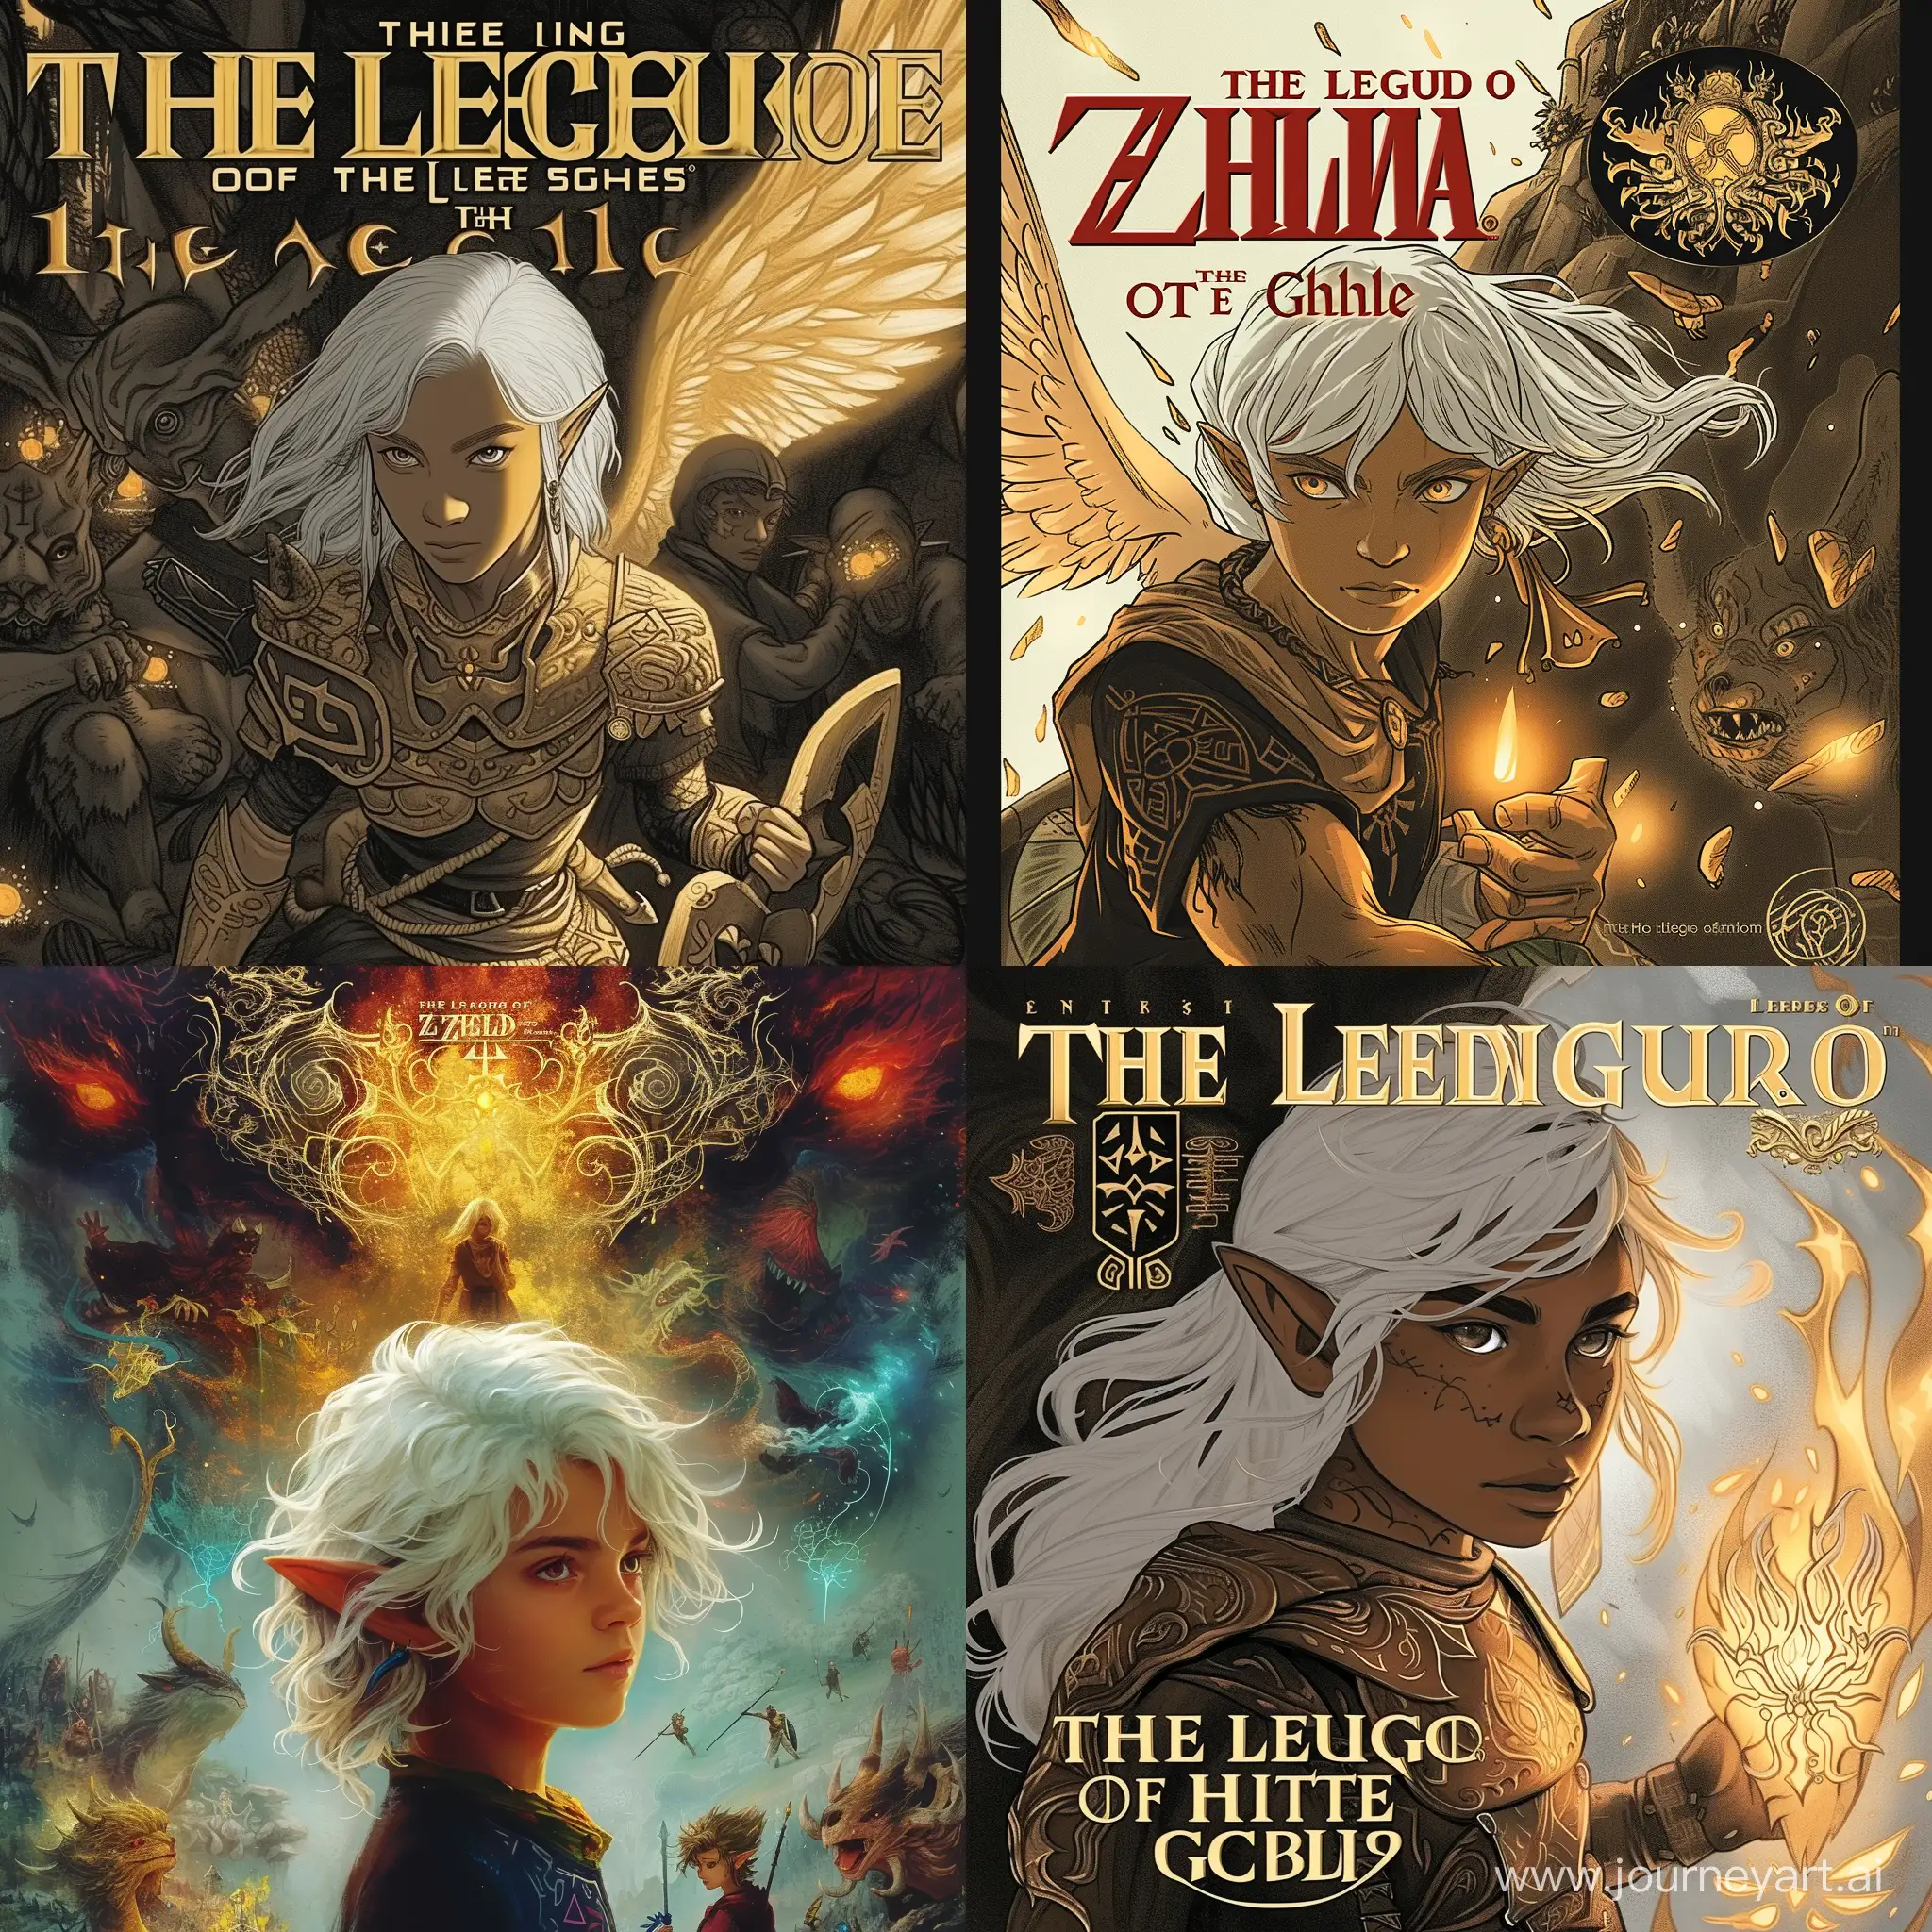 A cover page of a fantasy tale known as "The Legend Of The Light Child", about divine gods, legendary beasts, fantasy creatures, magic runes and a child hero with white hair similar to link from The Legend Of Zelda, who is going to change everything.